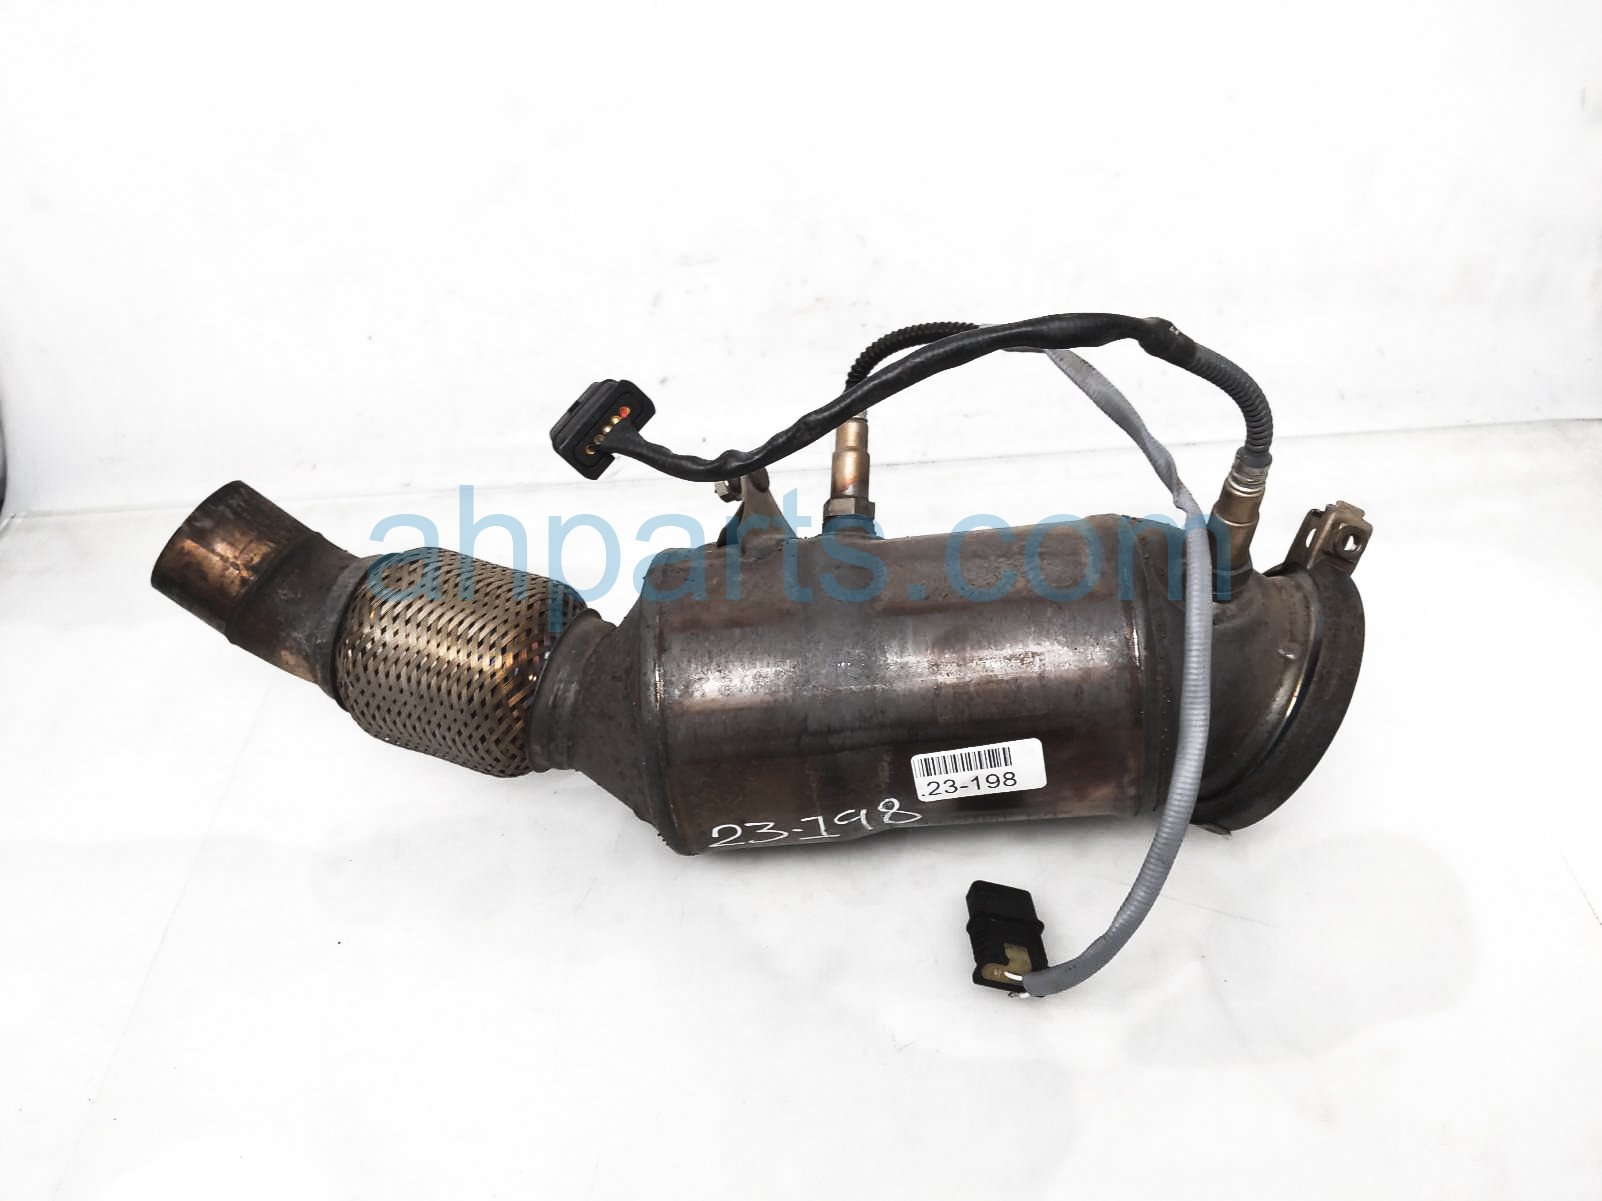 $599 BMW EXHAUST COVERTER - 2.0L